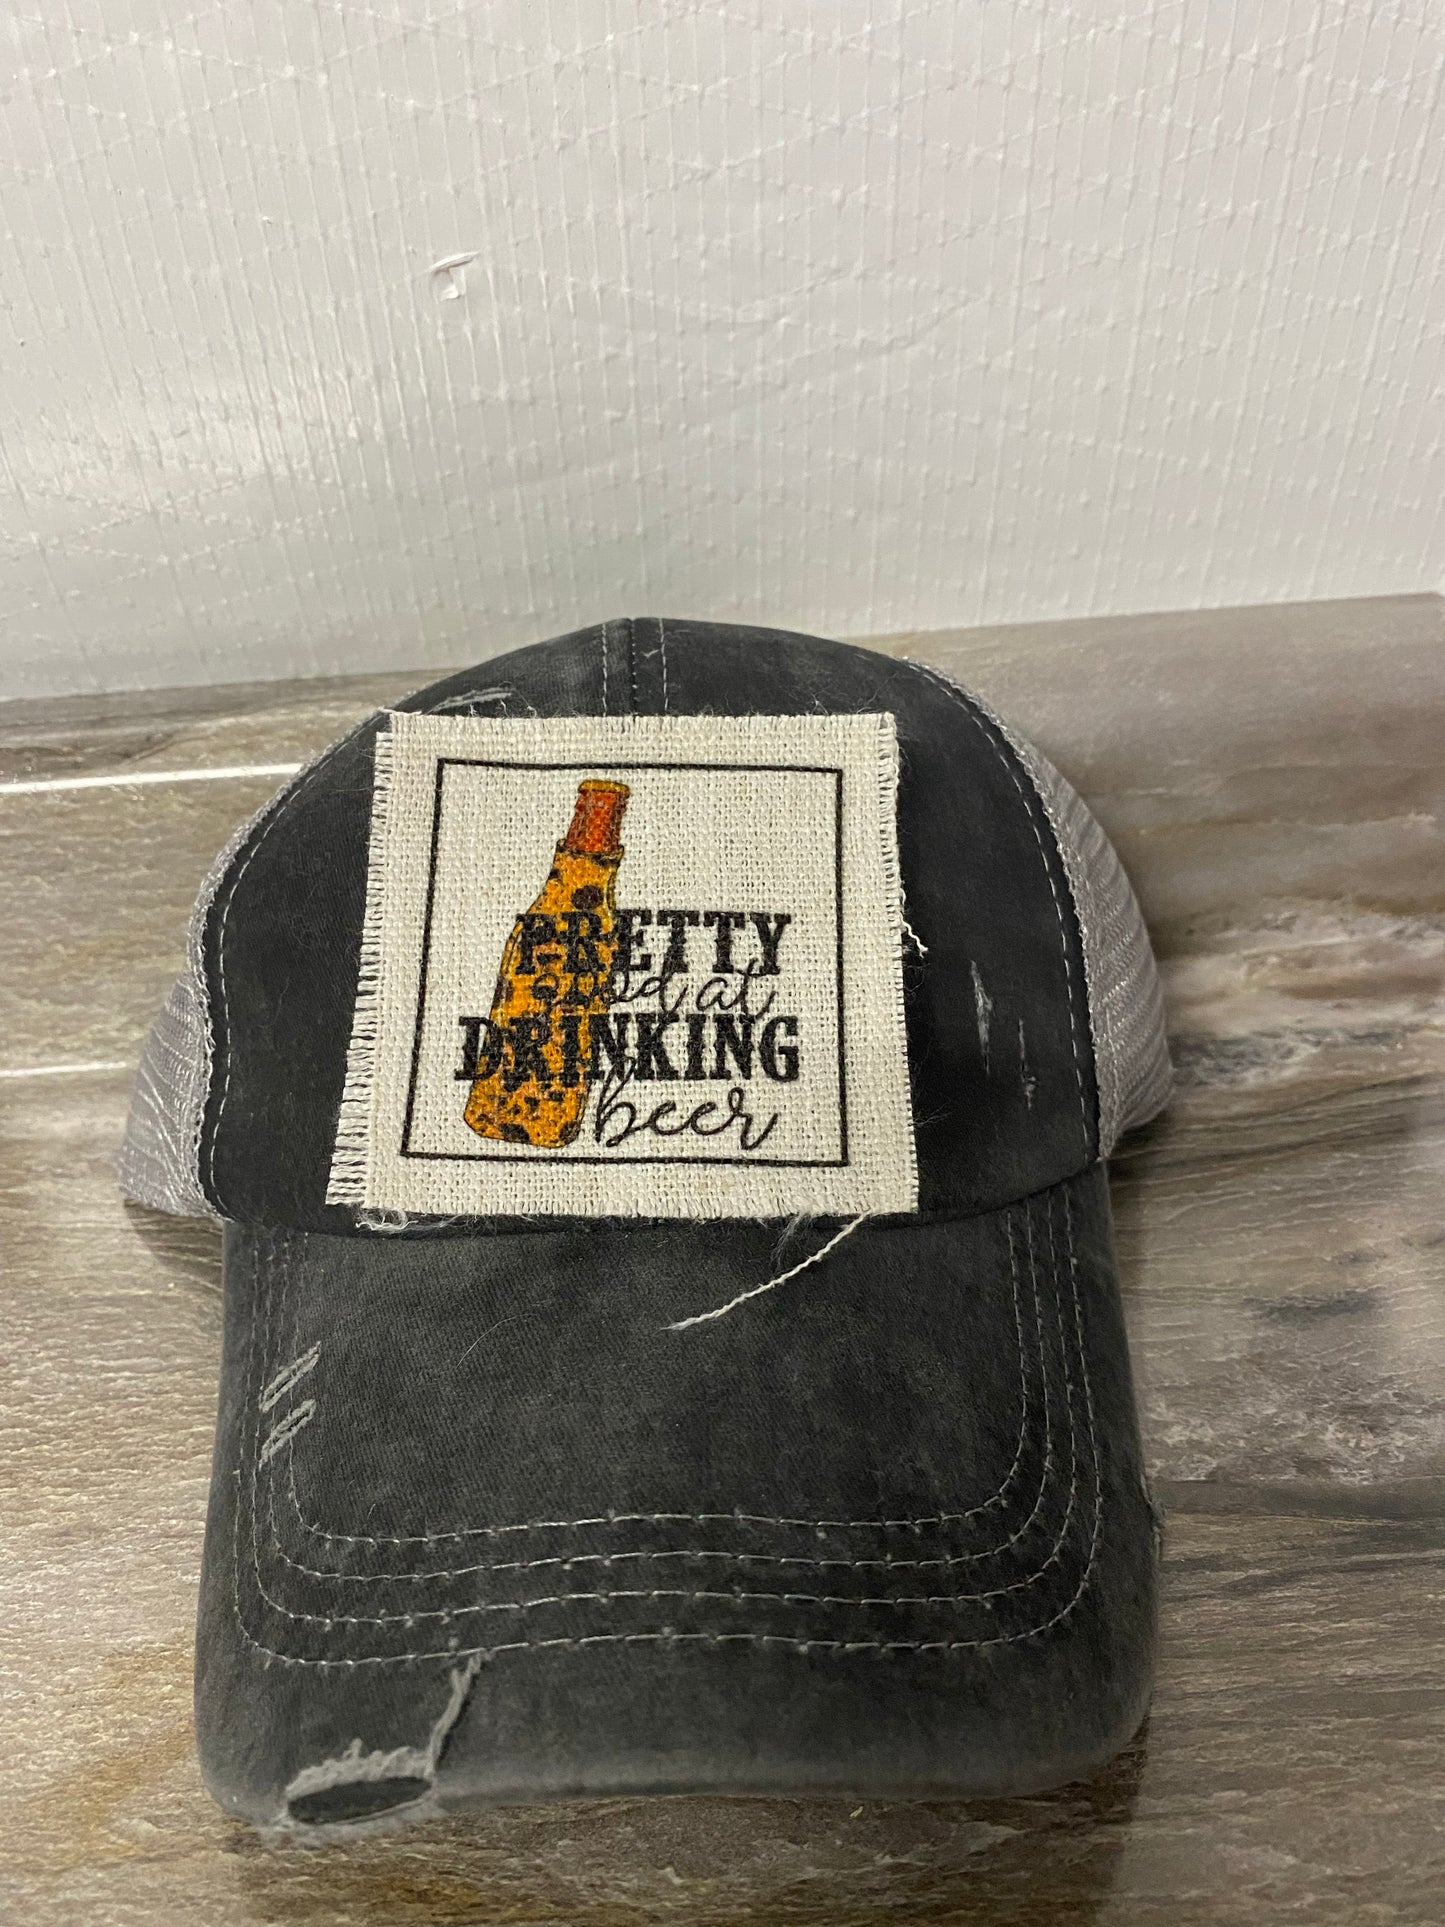 Pretty Good At Drinking Beer Hat Patch